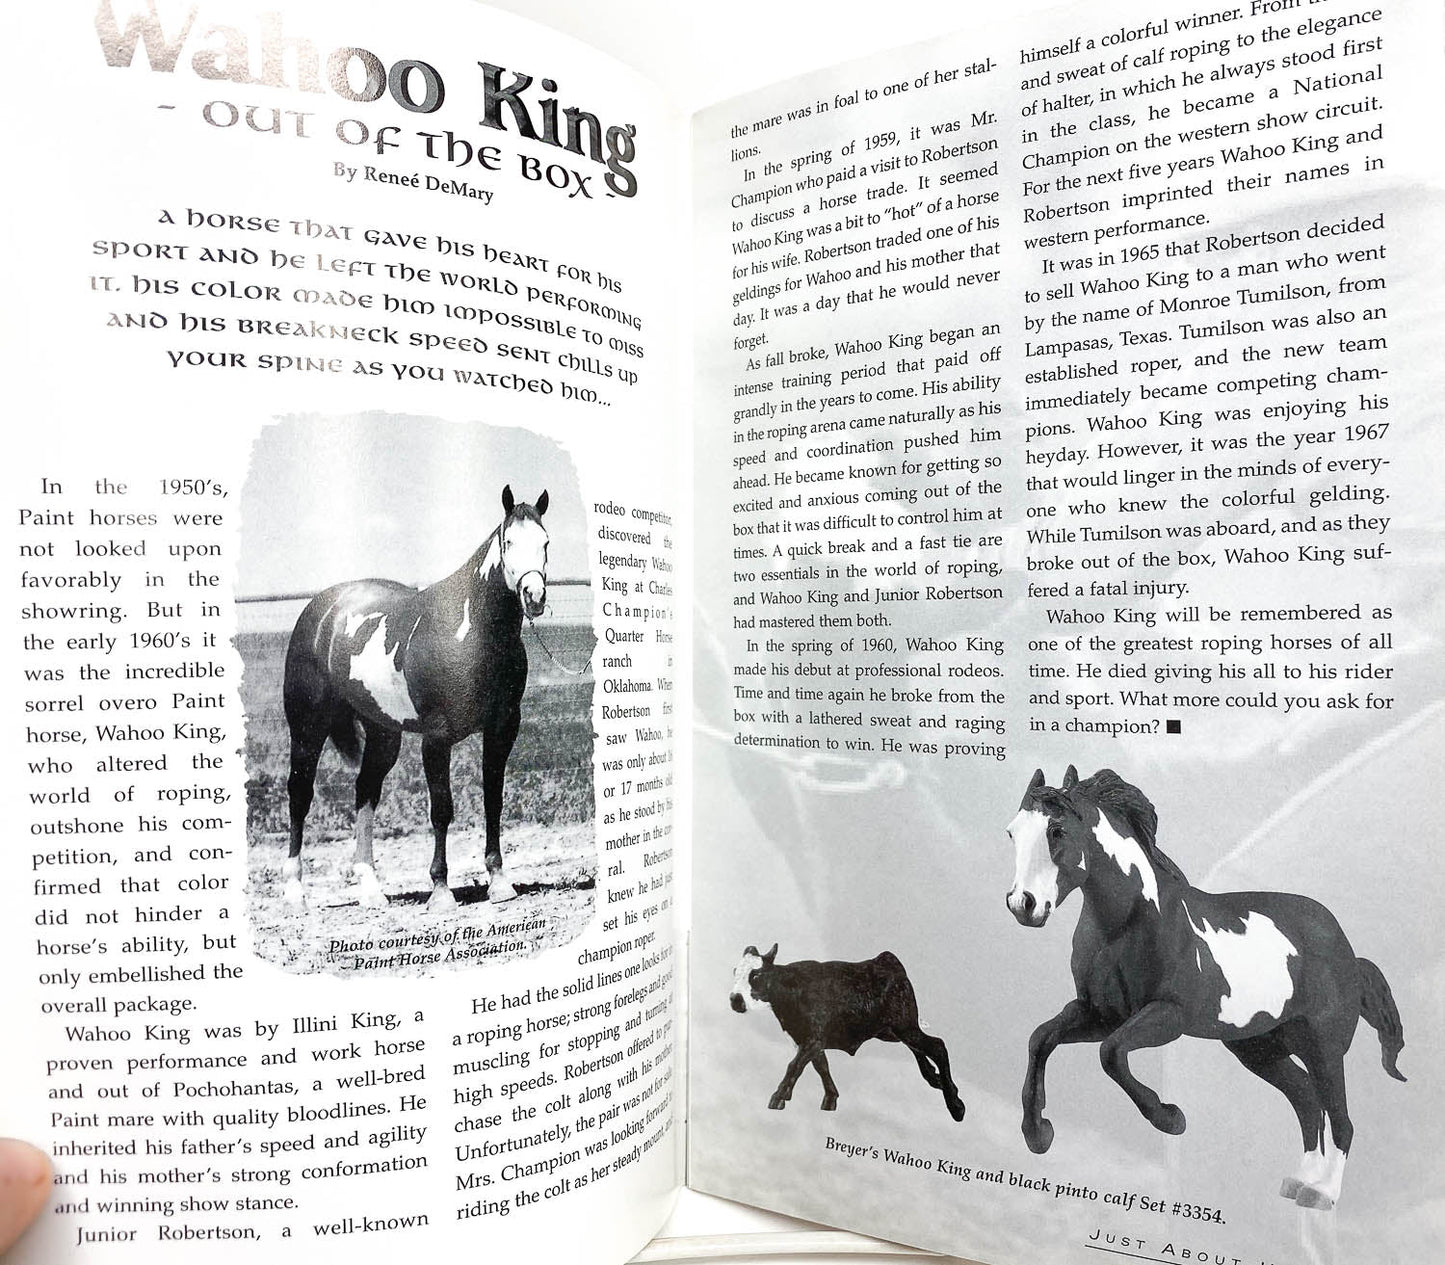 Just About Horses Magazine Vol. 26, No. 3, 1999 May/June